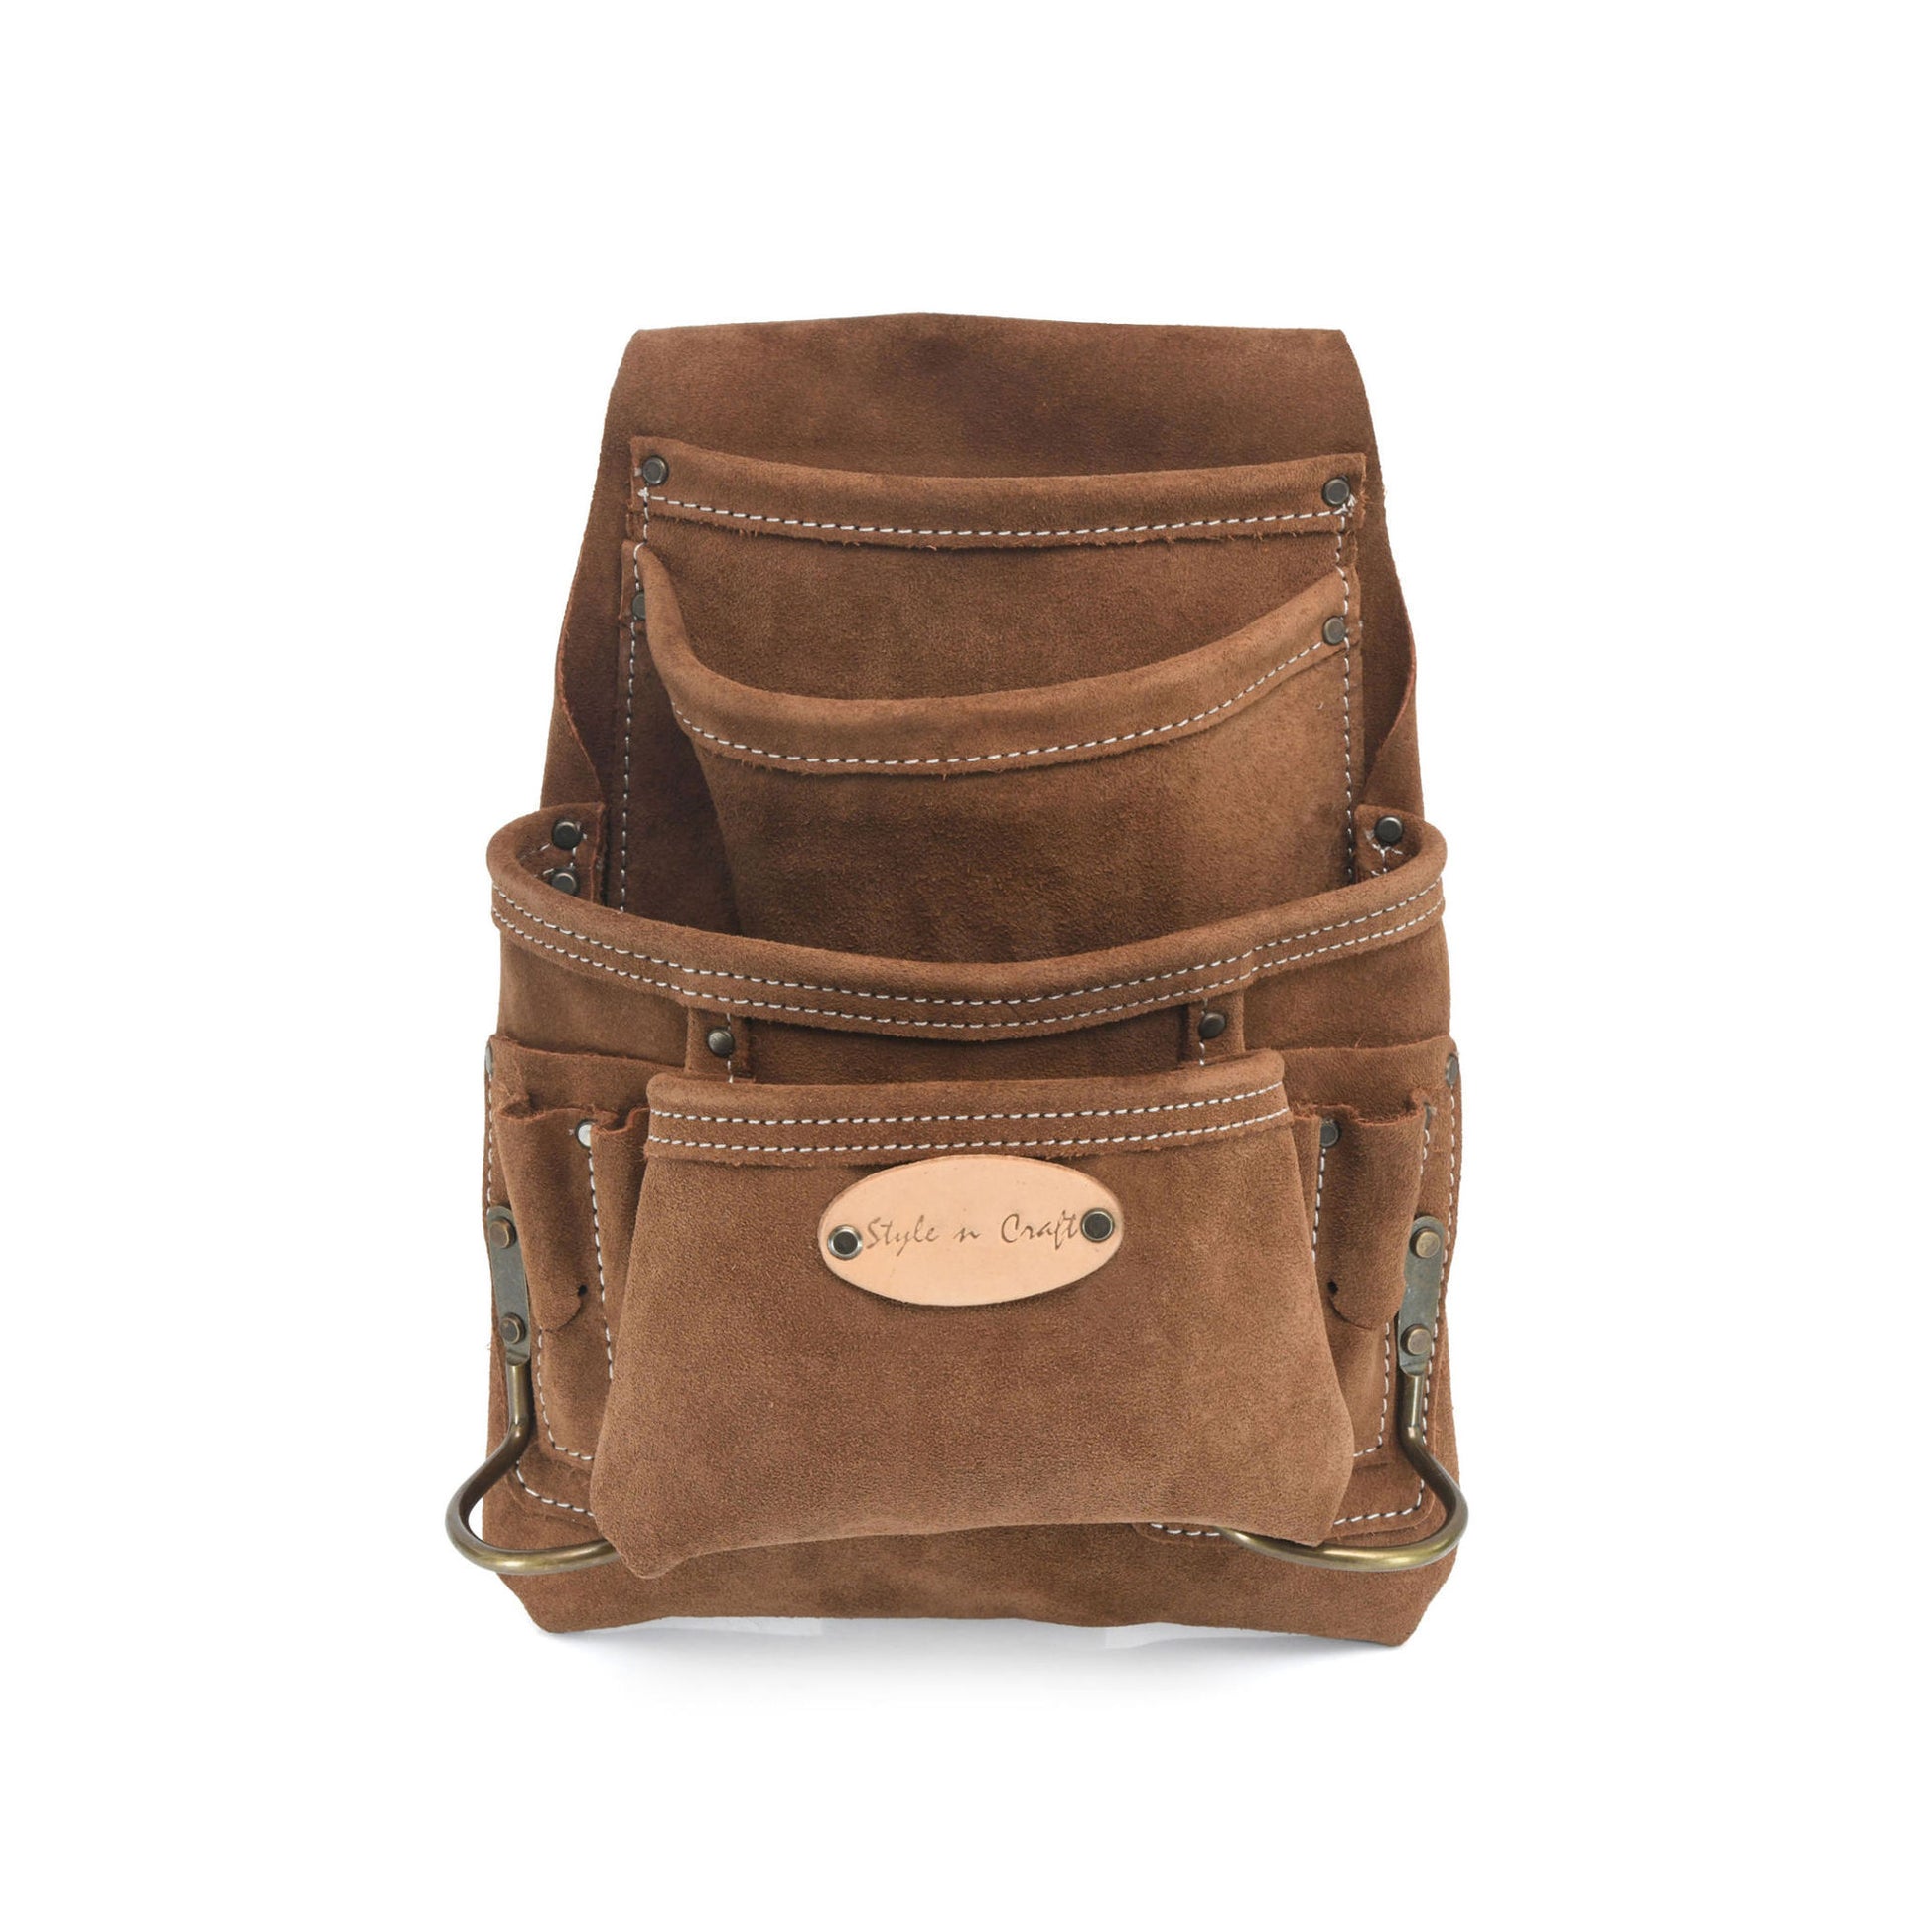 Style n Craft 88923 - 10 Pocket Carpenter's Nail and Tool Pouch in Heavy Duty Suede Leather in Dark Tan Color with Antique Finish Hardware - Front View